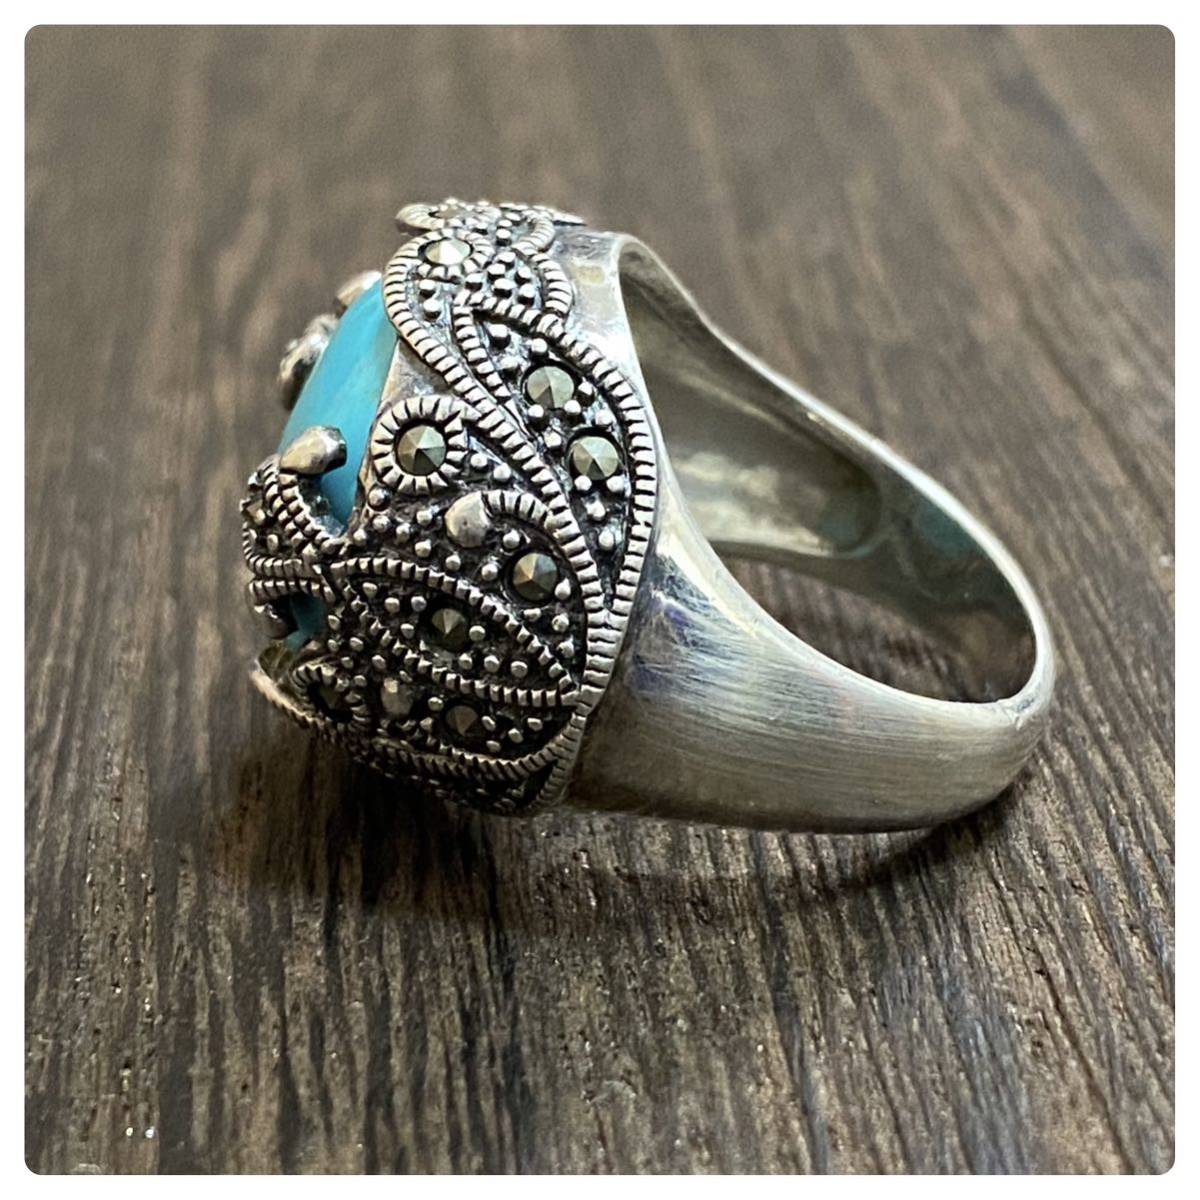  silver 925 sterling sterling Vintage Indian jewelry turquoise ma-ka site ring ring 